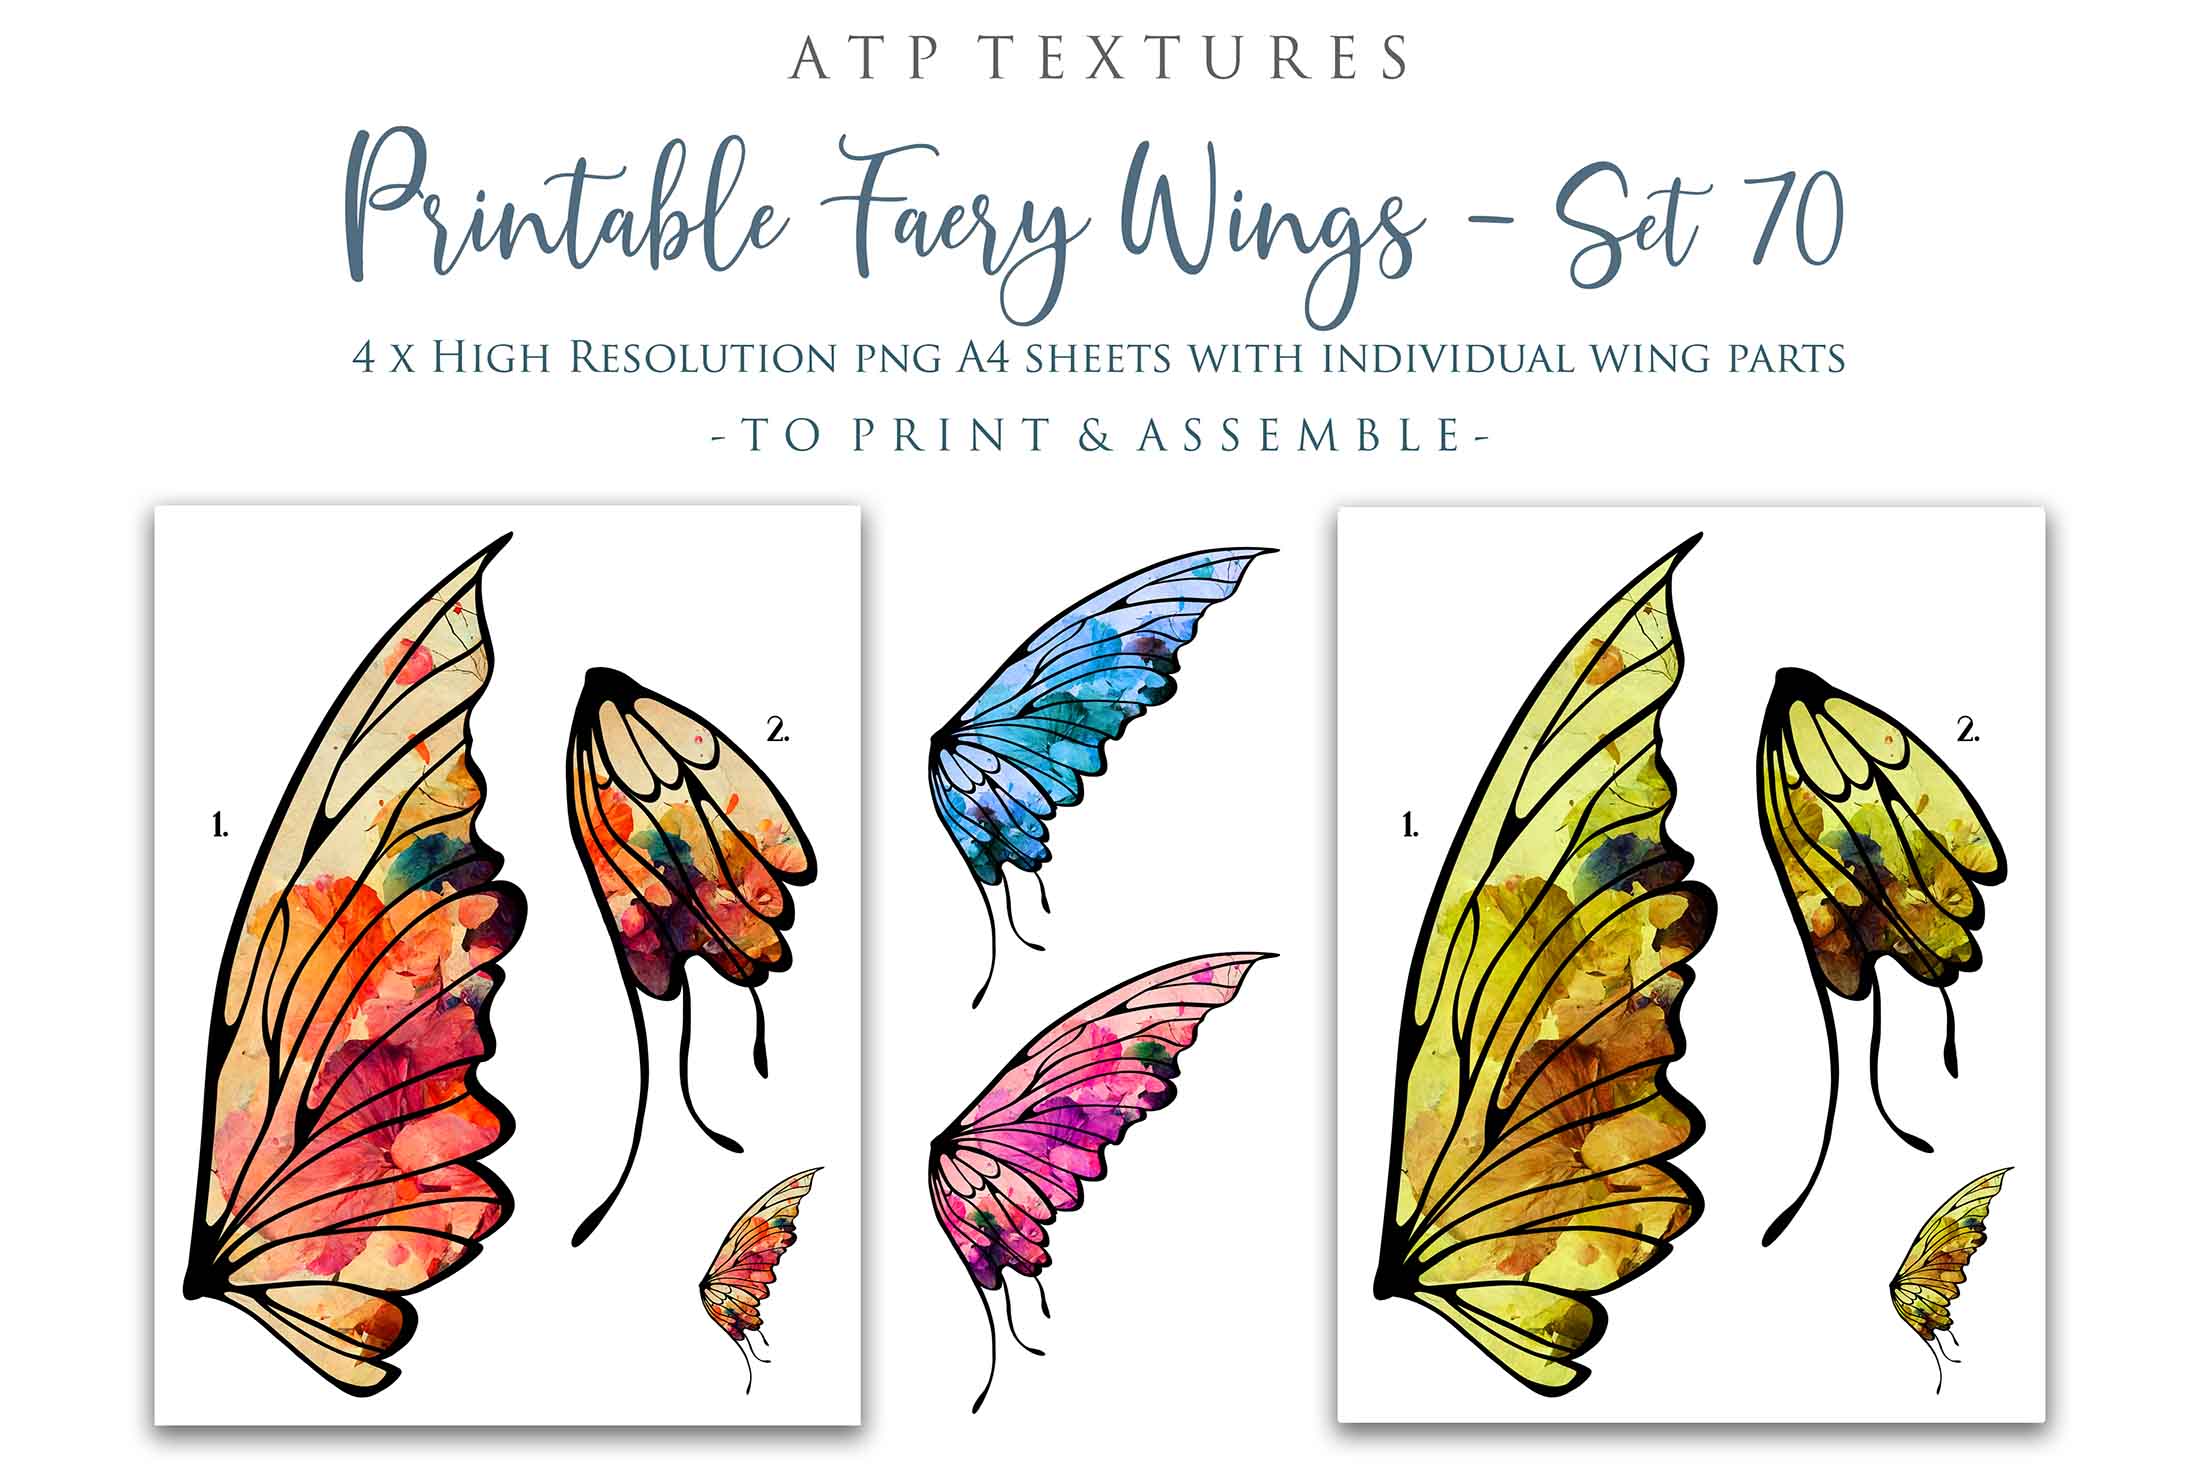 Printable Fairy Wings. For Art Dolls, Adults, Children. High resolution, png files. This is a digital product. Print and cut. Paper craft. Create fairy wing earrings or crown jewelry from these designs. Fairycore, Halloween, Diy Crafting Costume.